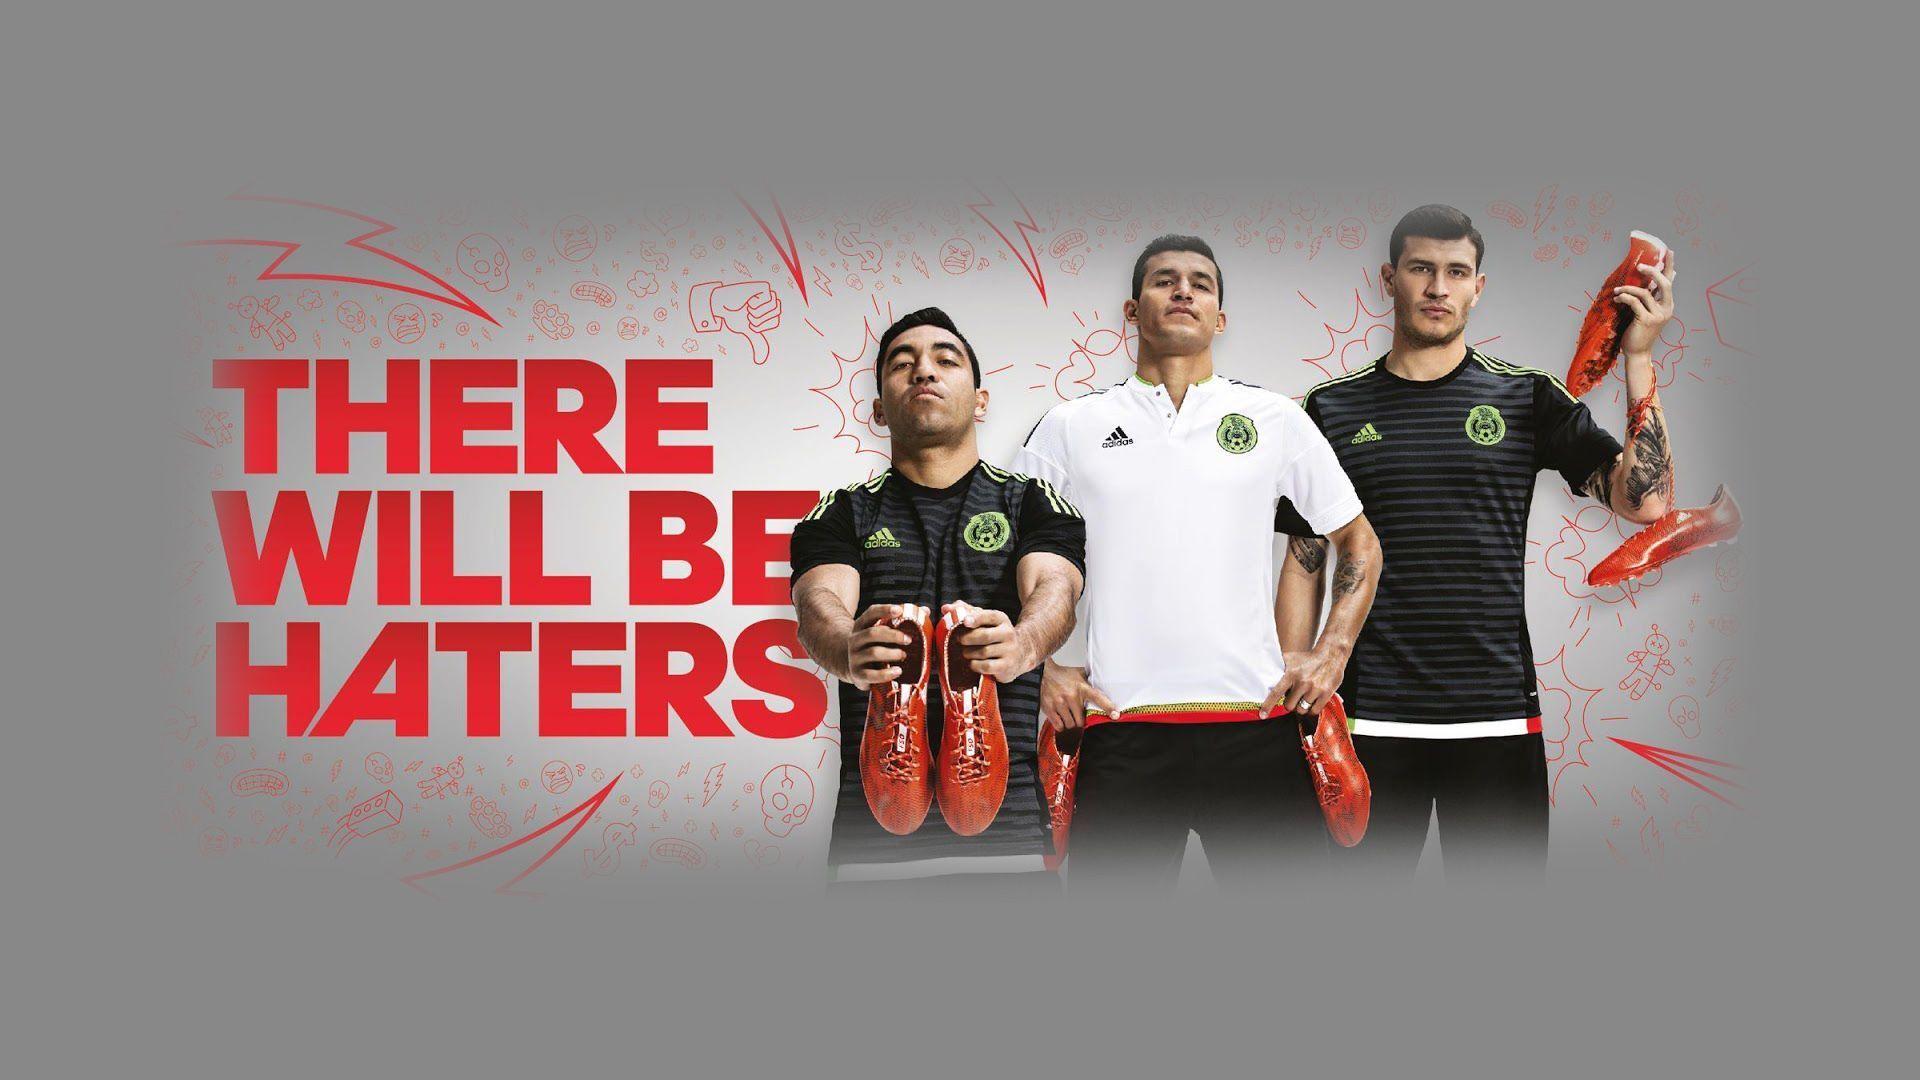 Mexico 2015 Copa America Adidas Kits Wallpapers Wide or HD